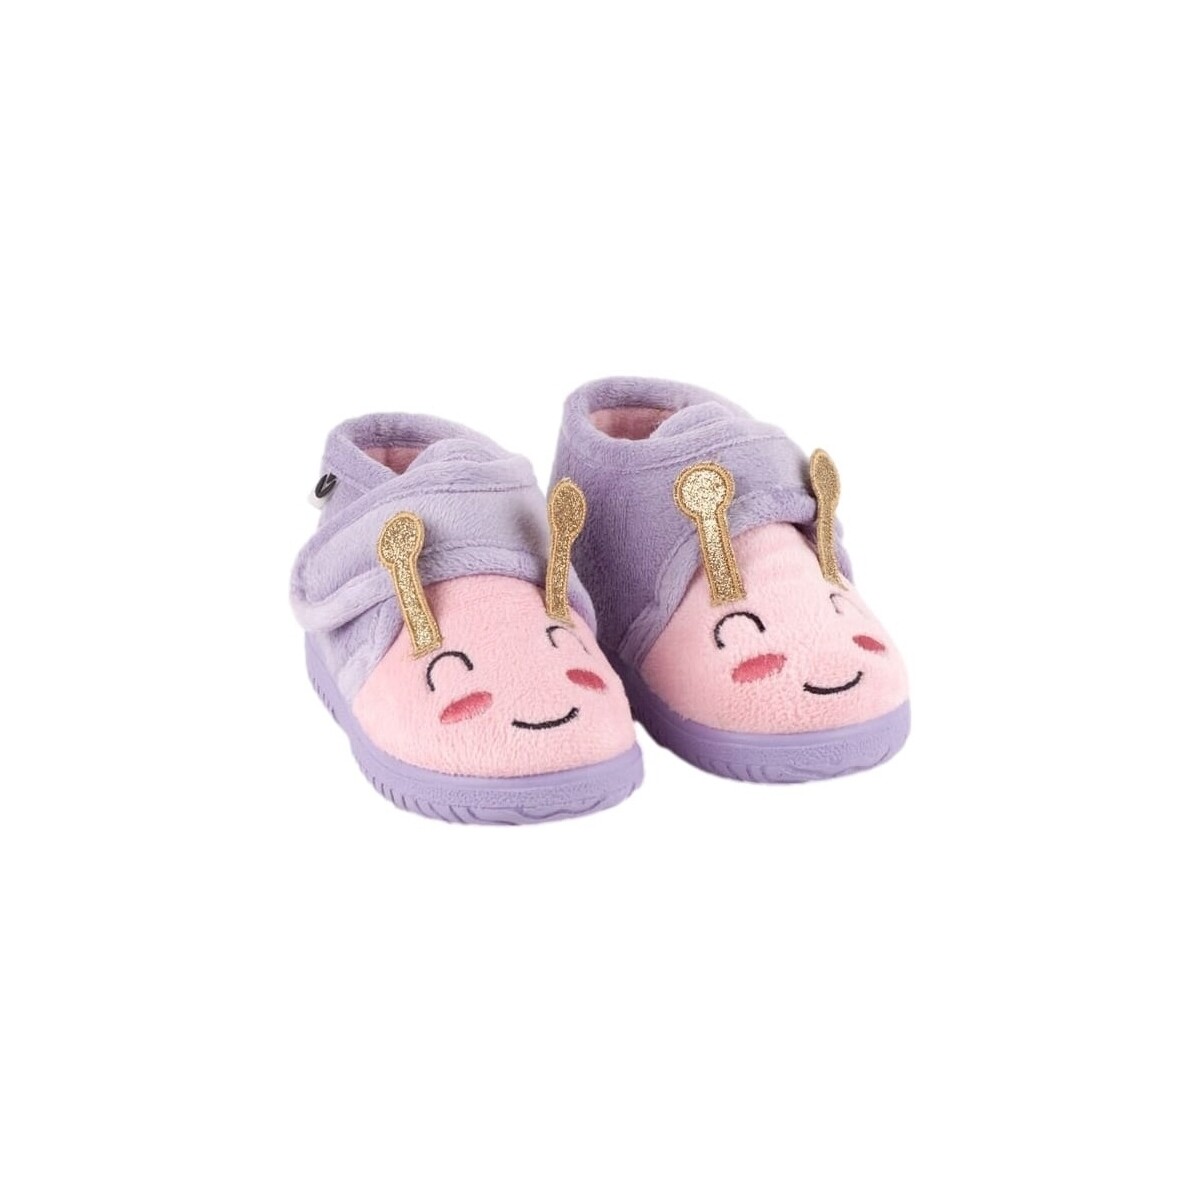 Victoria Violet Baby Shoes 05119 - Lila IaMRoBMy